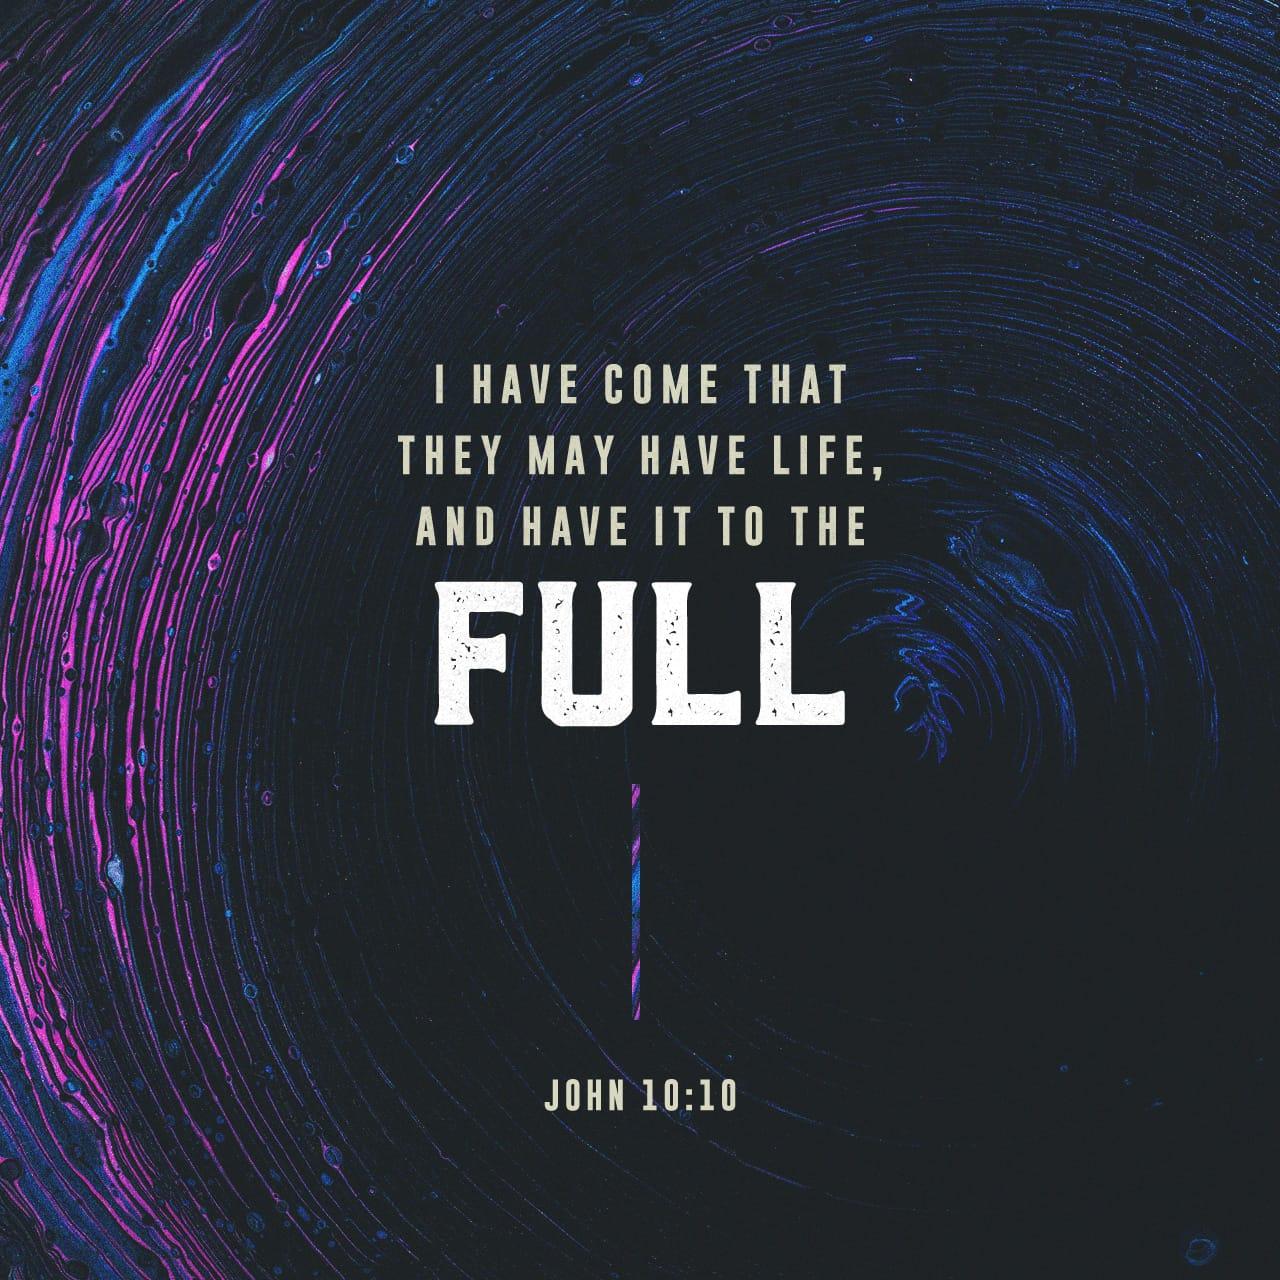 Bible Verse of the Day - day 87 - image 37579 (John 10:1-10)